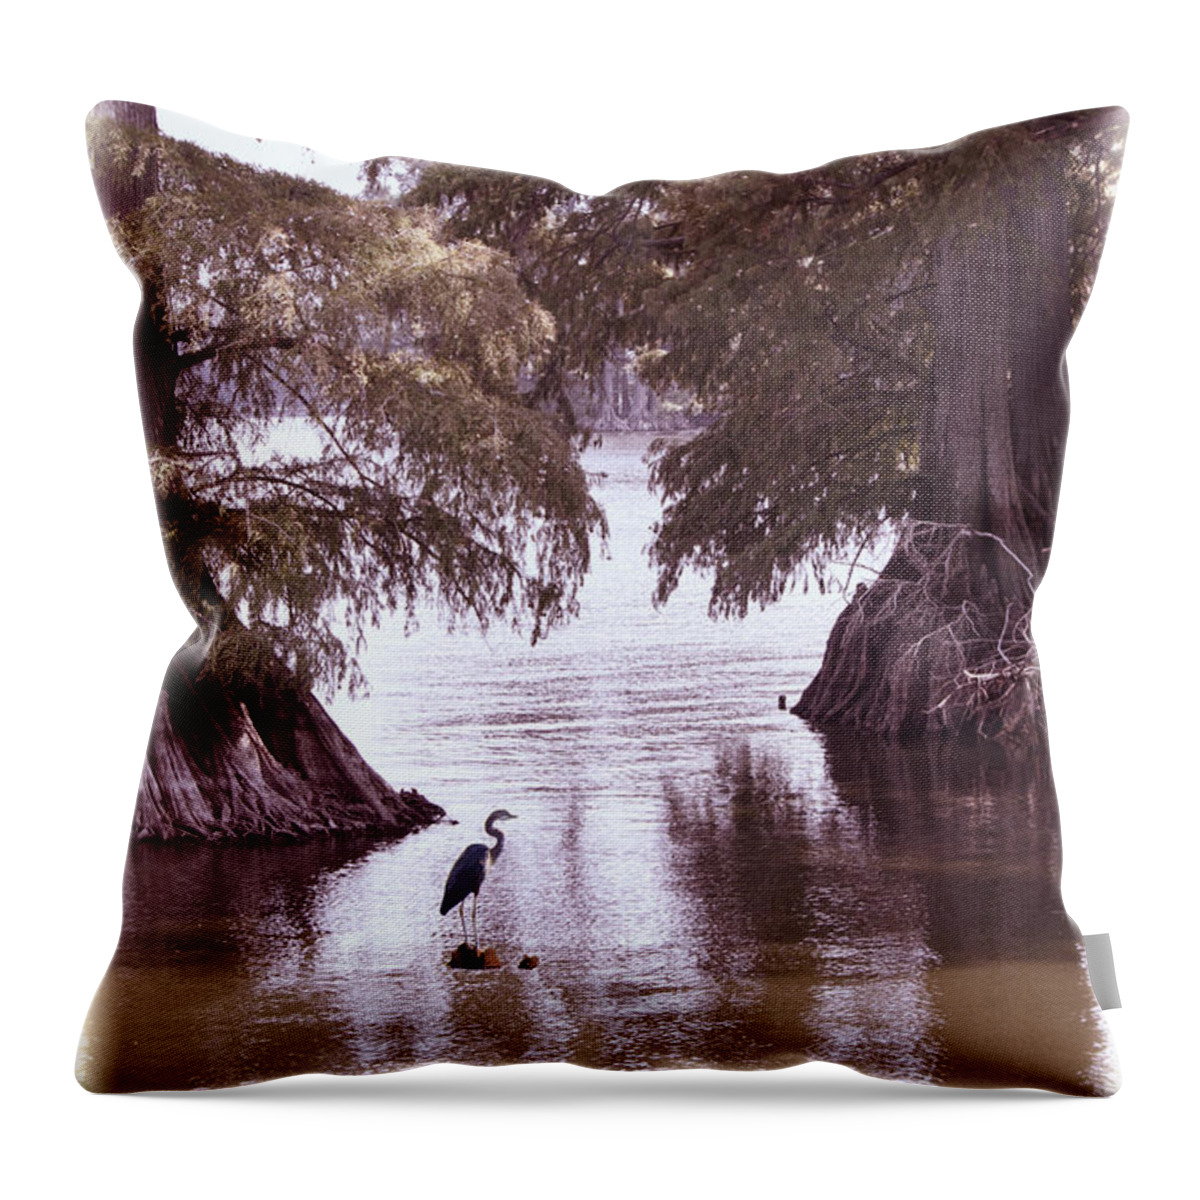 Landscape Throw Pillow featuring the photograph Reelfoot Lake #12 by Bonnie Willis